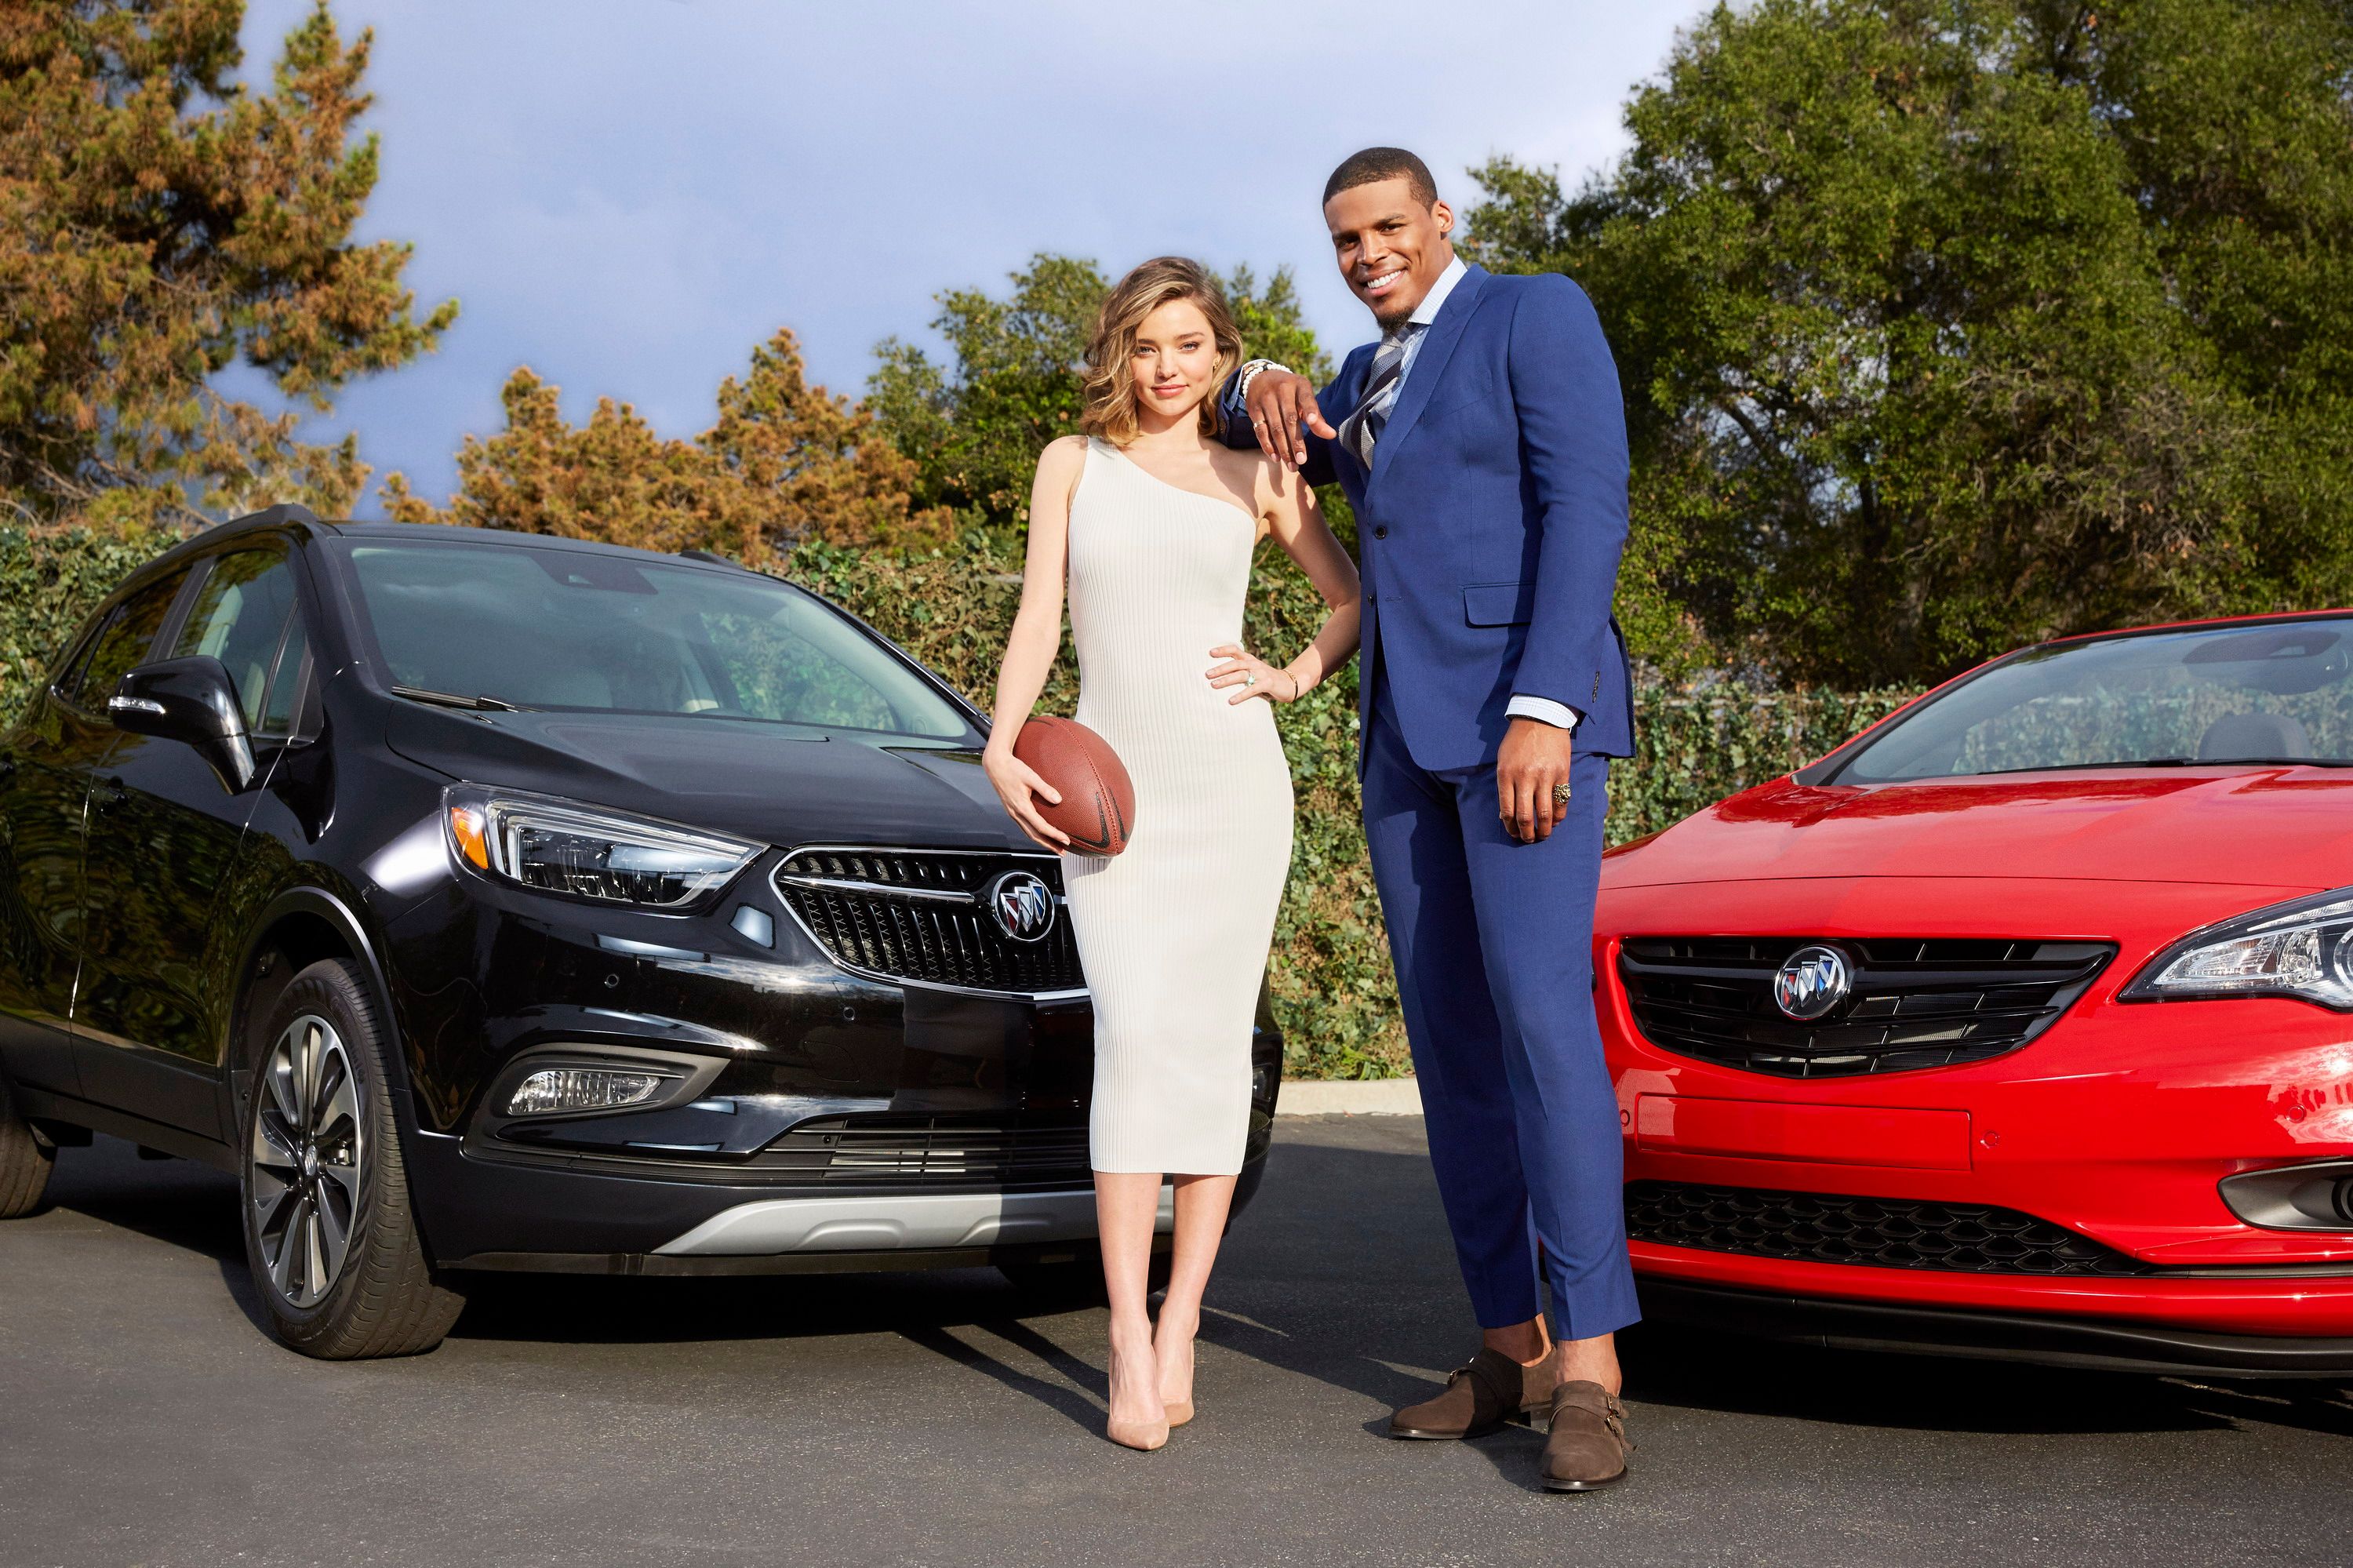 2018 Buick Goes Star-Studded Route For Its Super Bowl LI Commercial